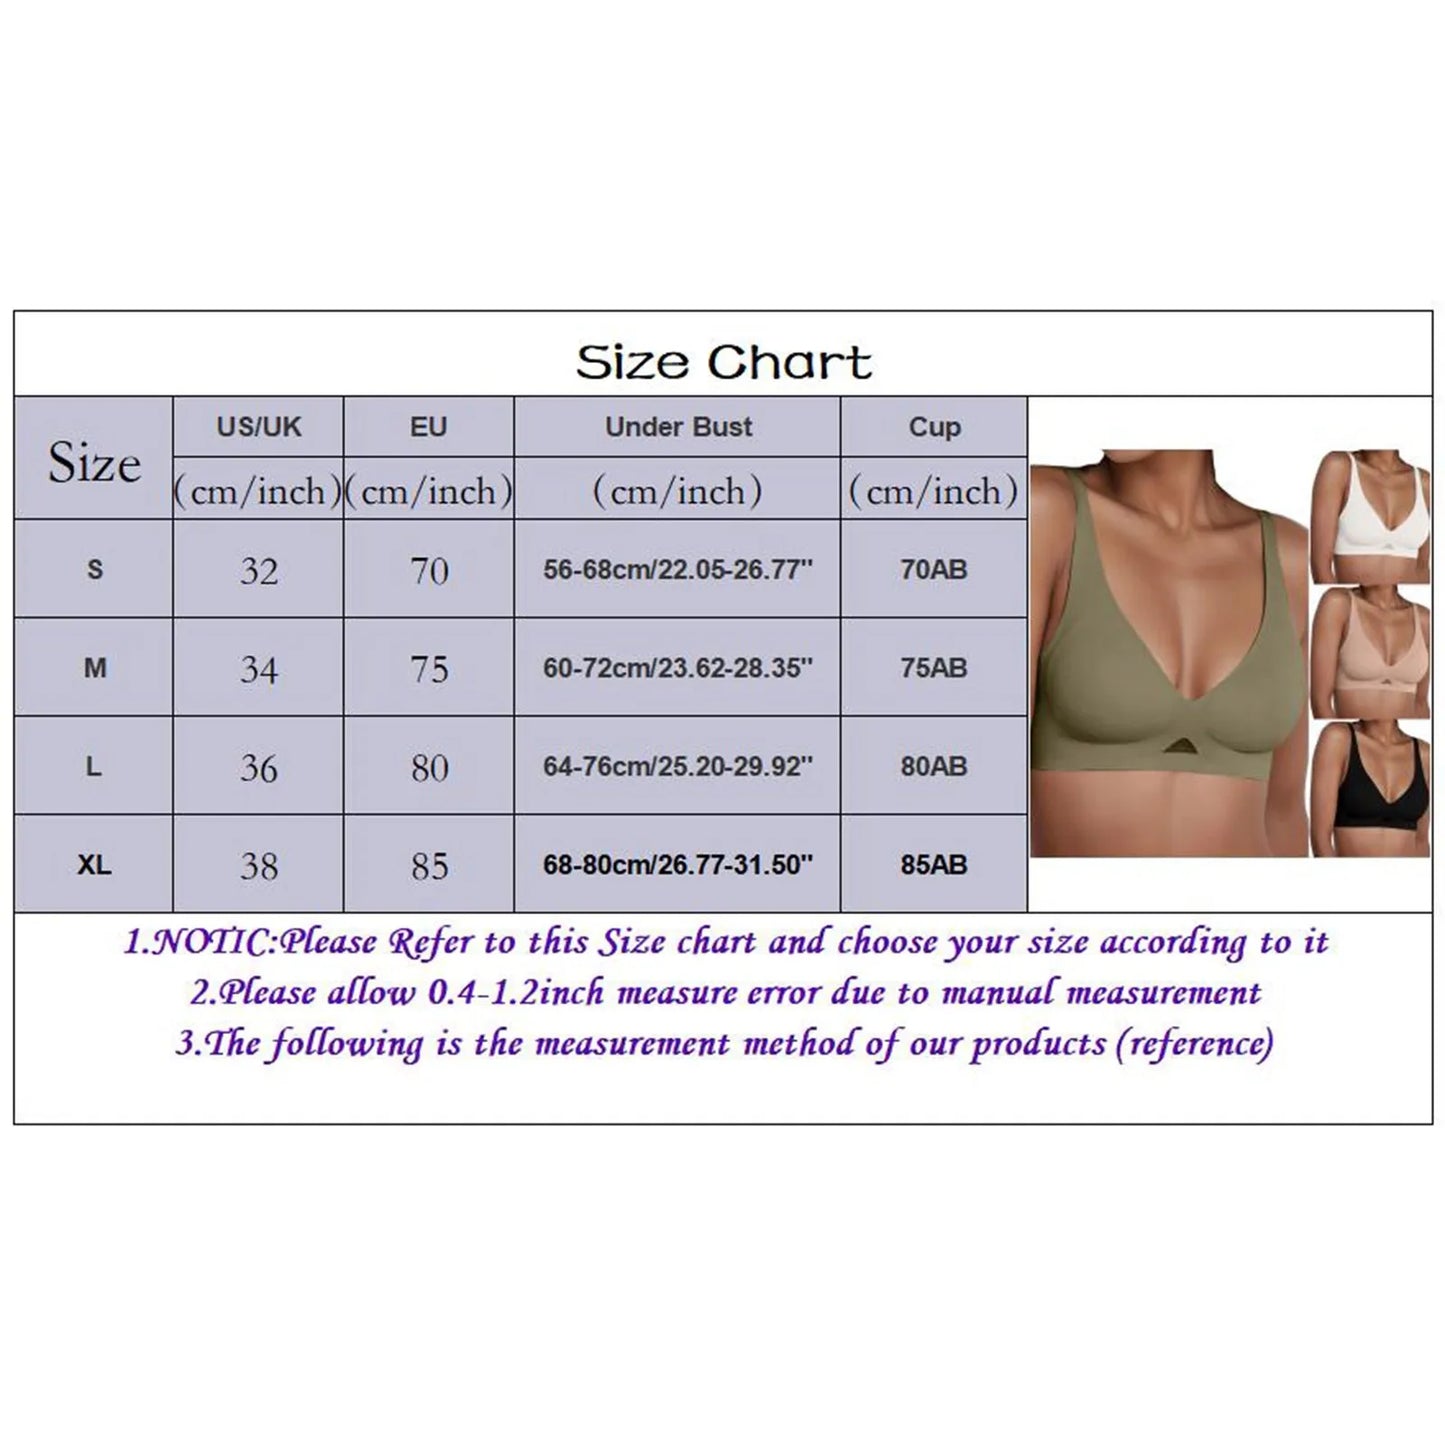 High-grade Seamless Breathable And Comfortable Support Bra